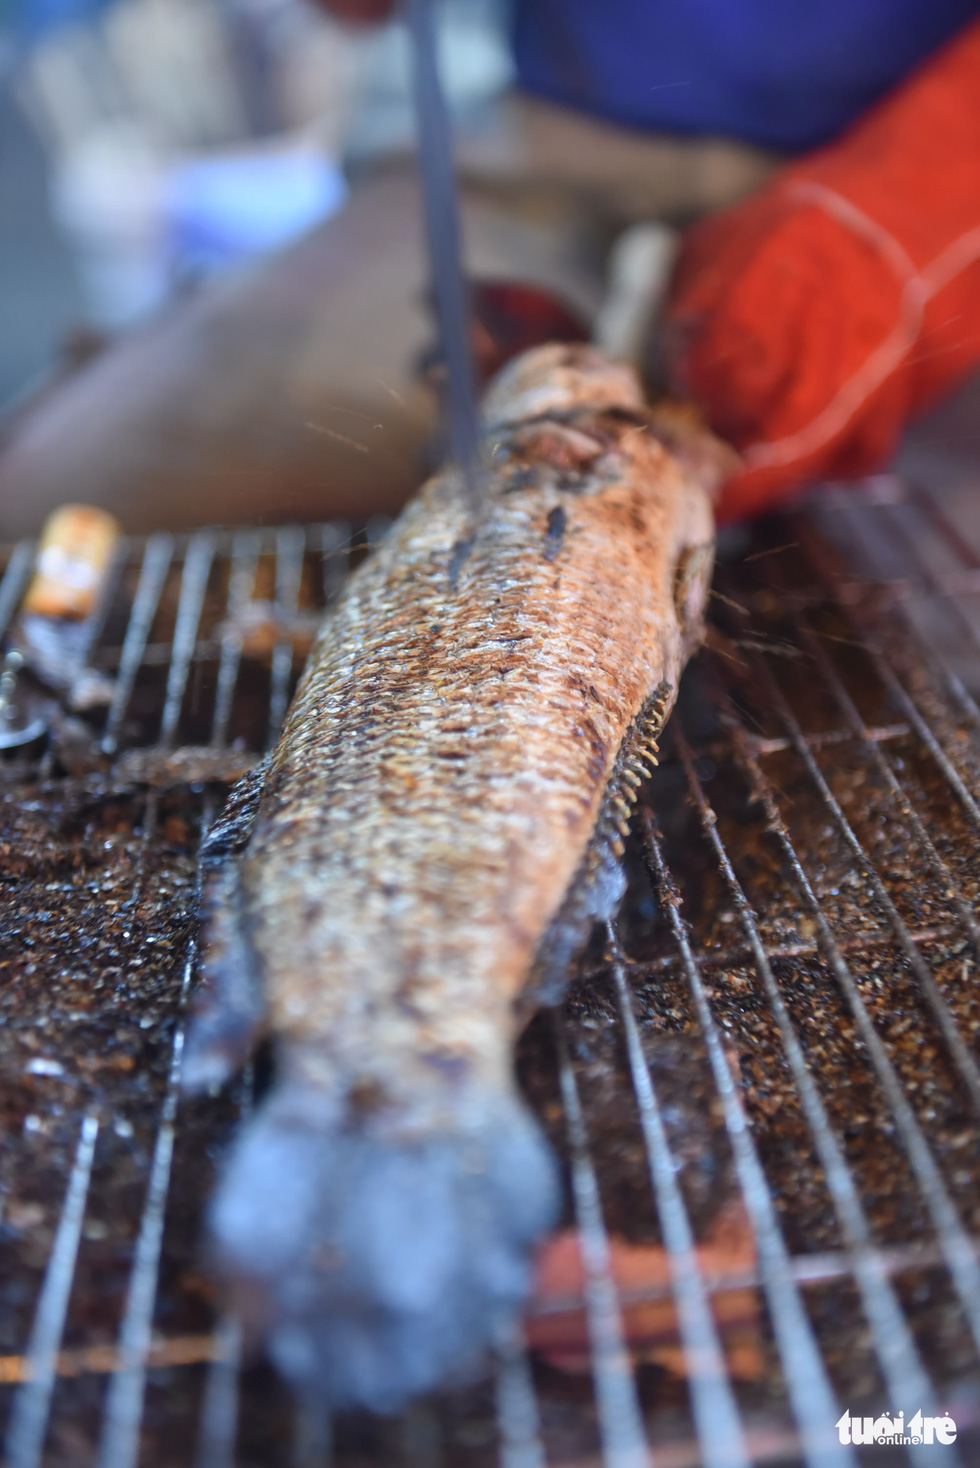 A snakehead fish on the grill at a shop in Tan Phu District, Ho Chi Minh City, February 9, 2022. Photo: Ngoc Phuong / Tuoi Tre